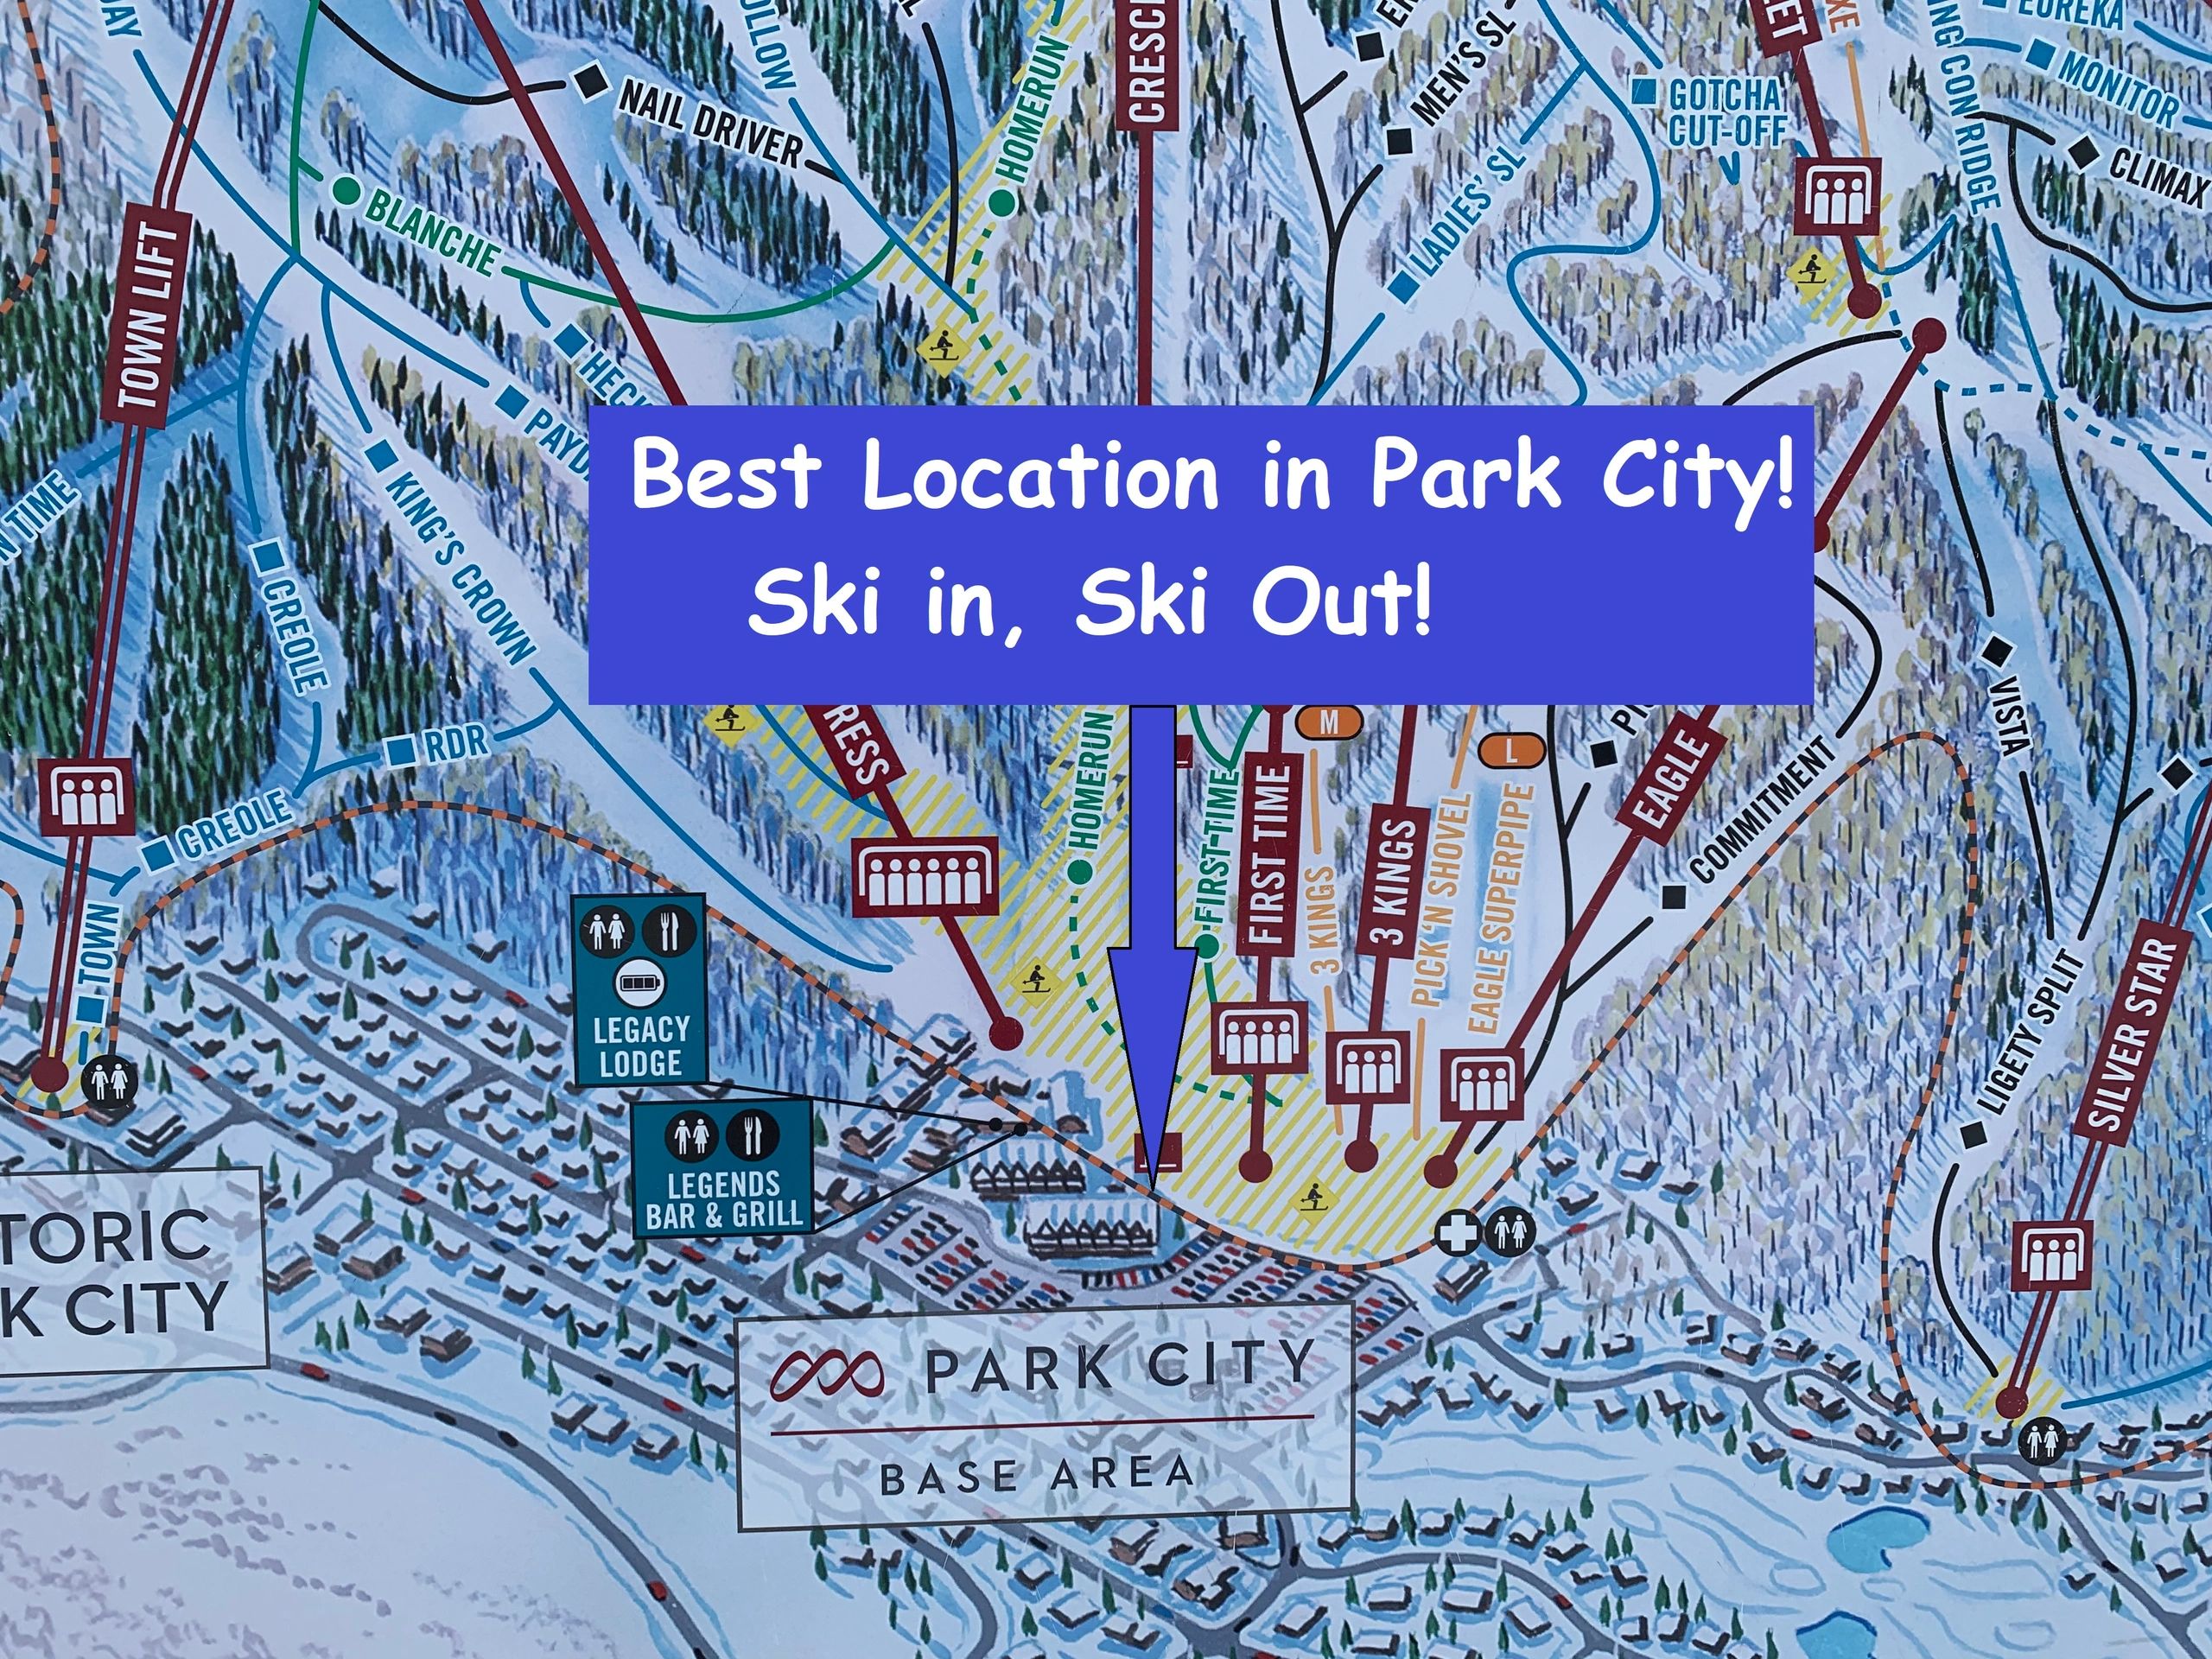 A map of the base area of Park City